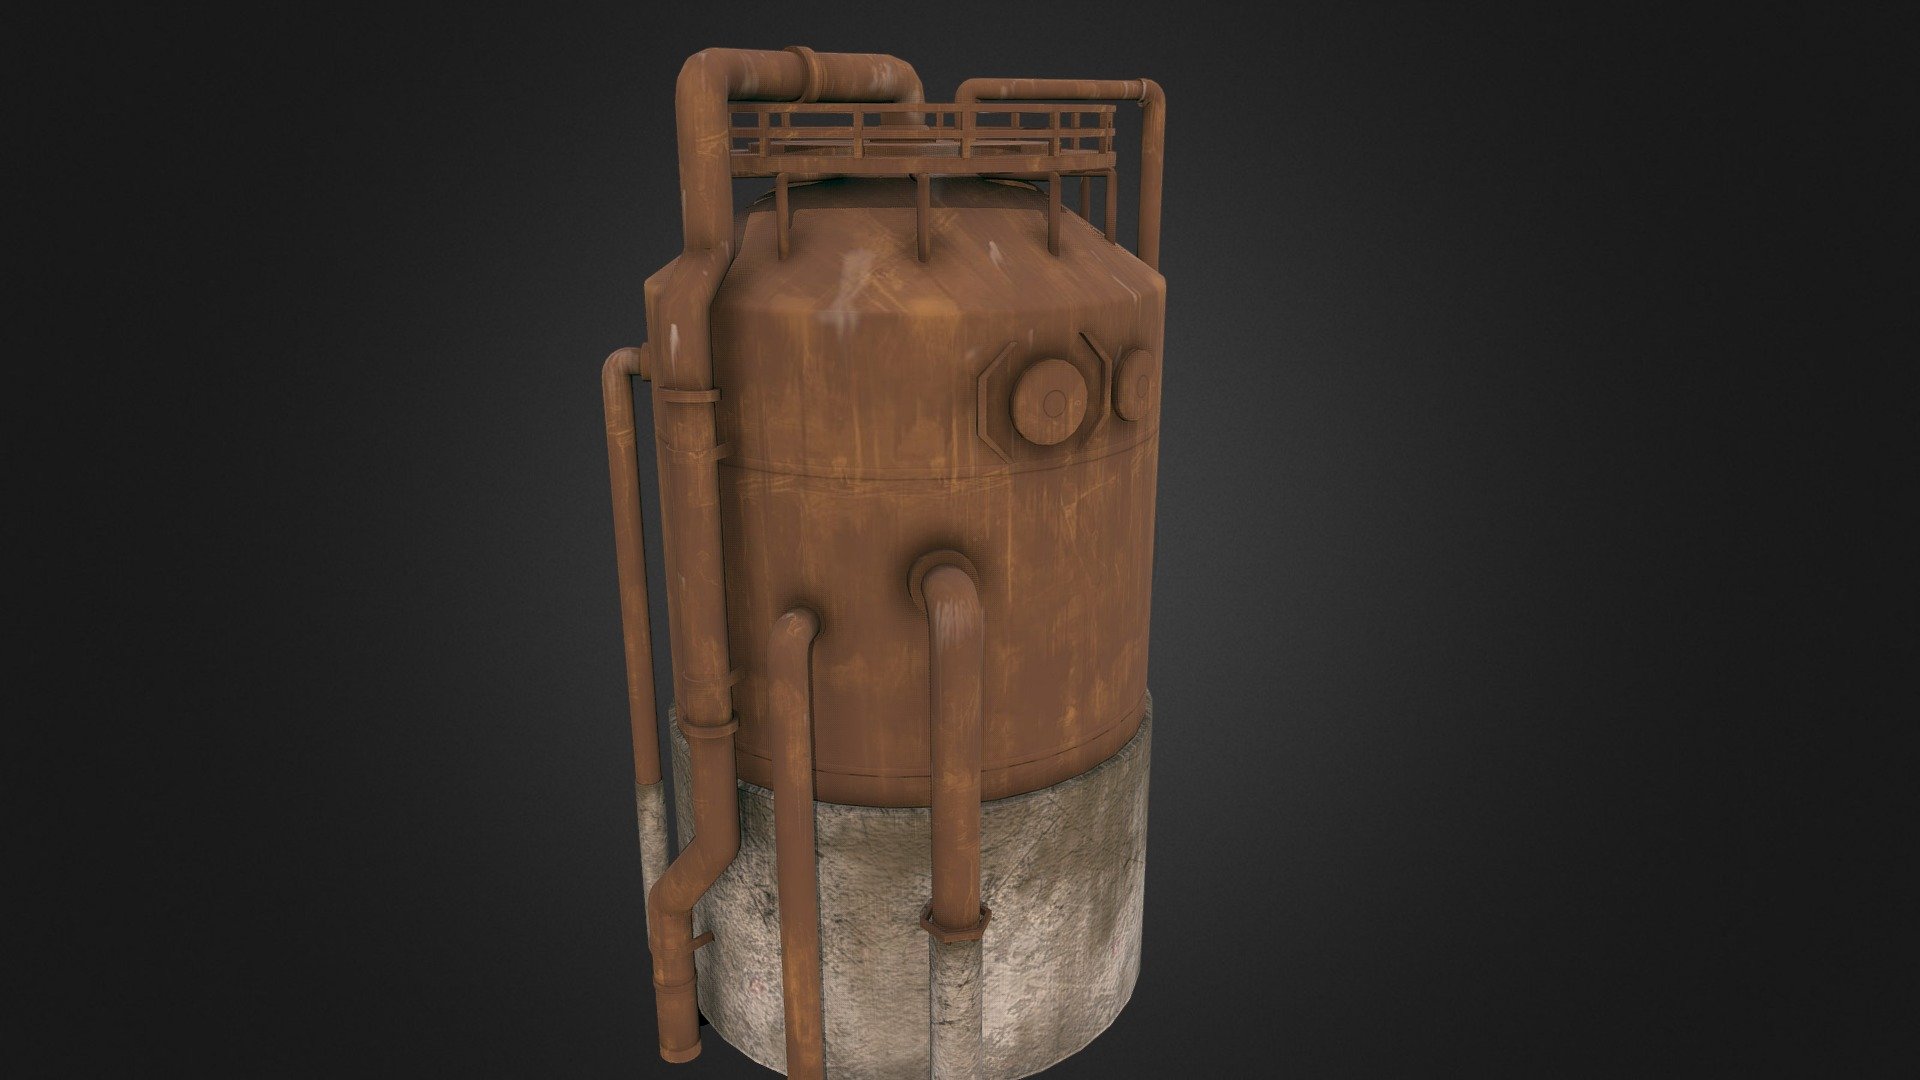 This pipe tank was made in blender, high-poly version was created in Blender and textures were made in Substance Painter.
Original artwork:https://www.pinterest.ru/pin/456763587193596371/ - Rust pipe tank 3d model